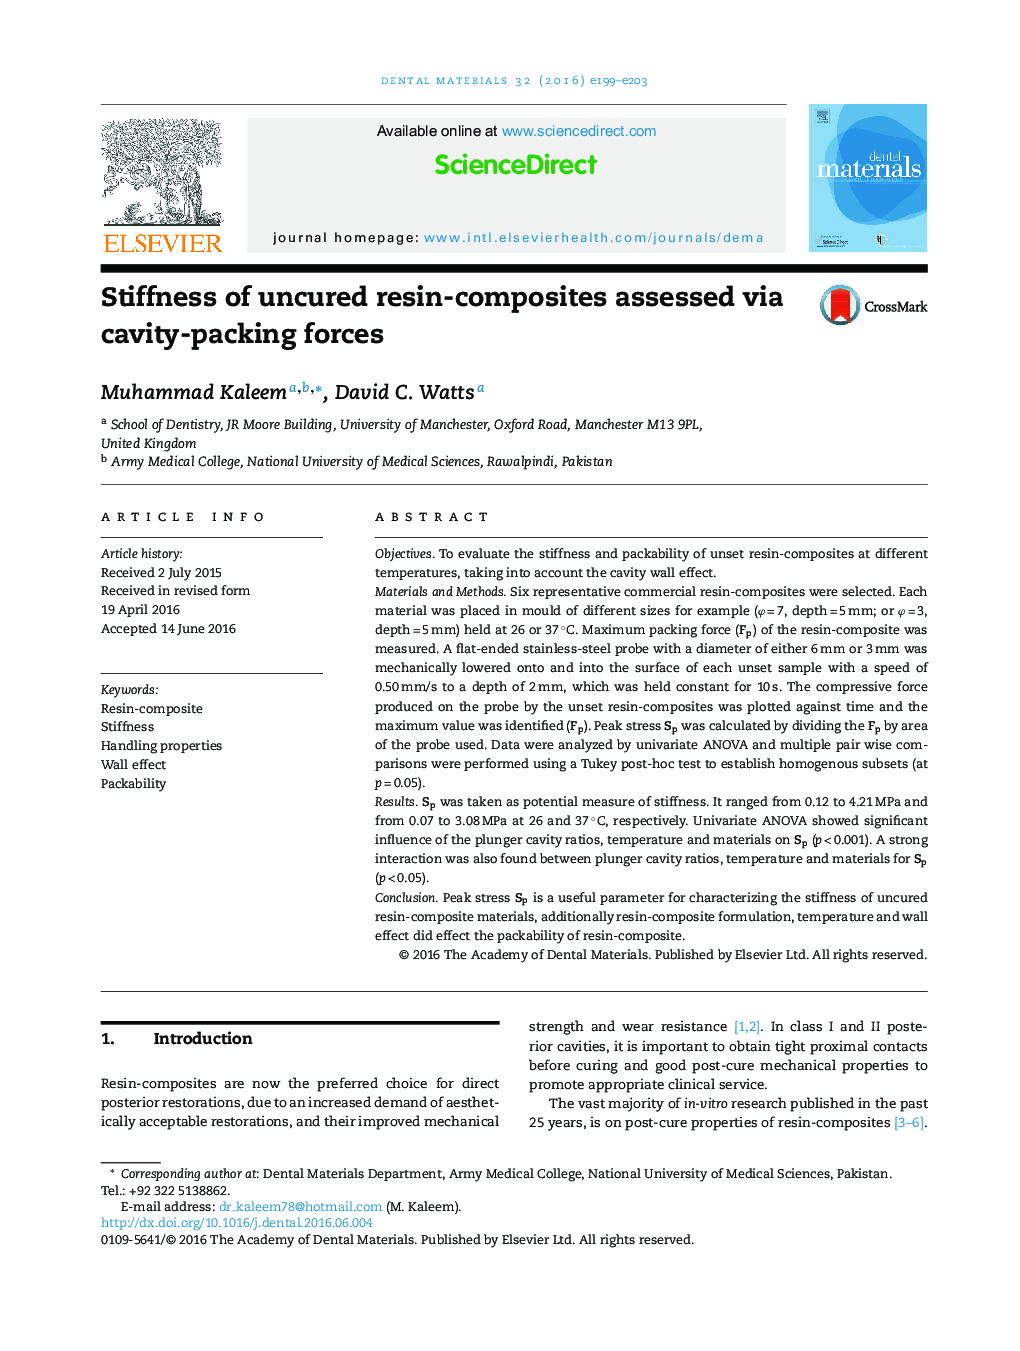 Stiffness of uncured resin-composites assessed via cavity-packing forces